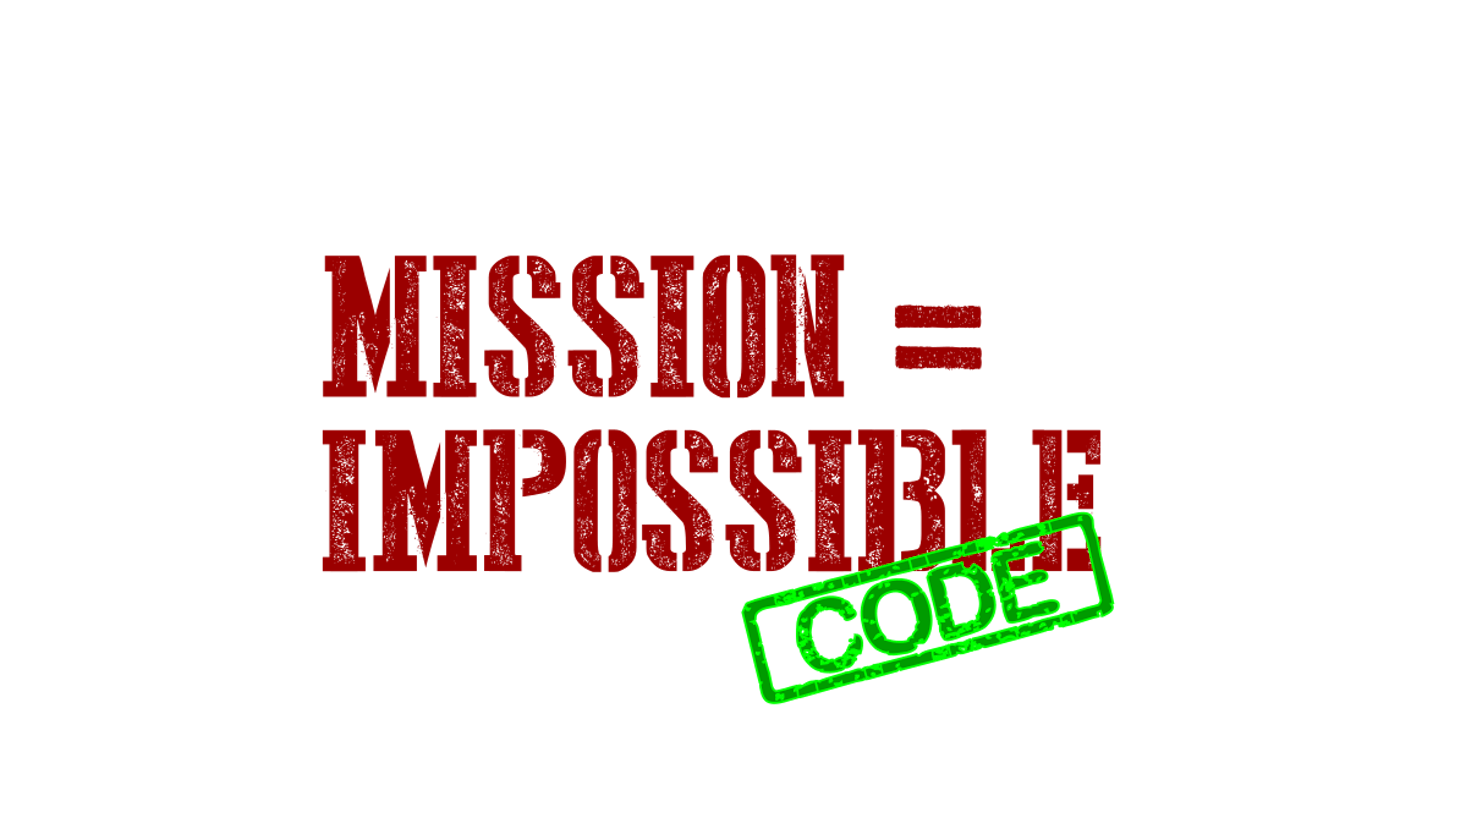 Mission Impossible Code - Compact, Idempotent, DevOps Oriented, Multi-Distro Package Installer Script for Linux and Mac